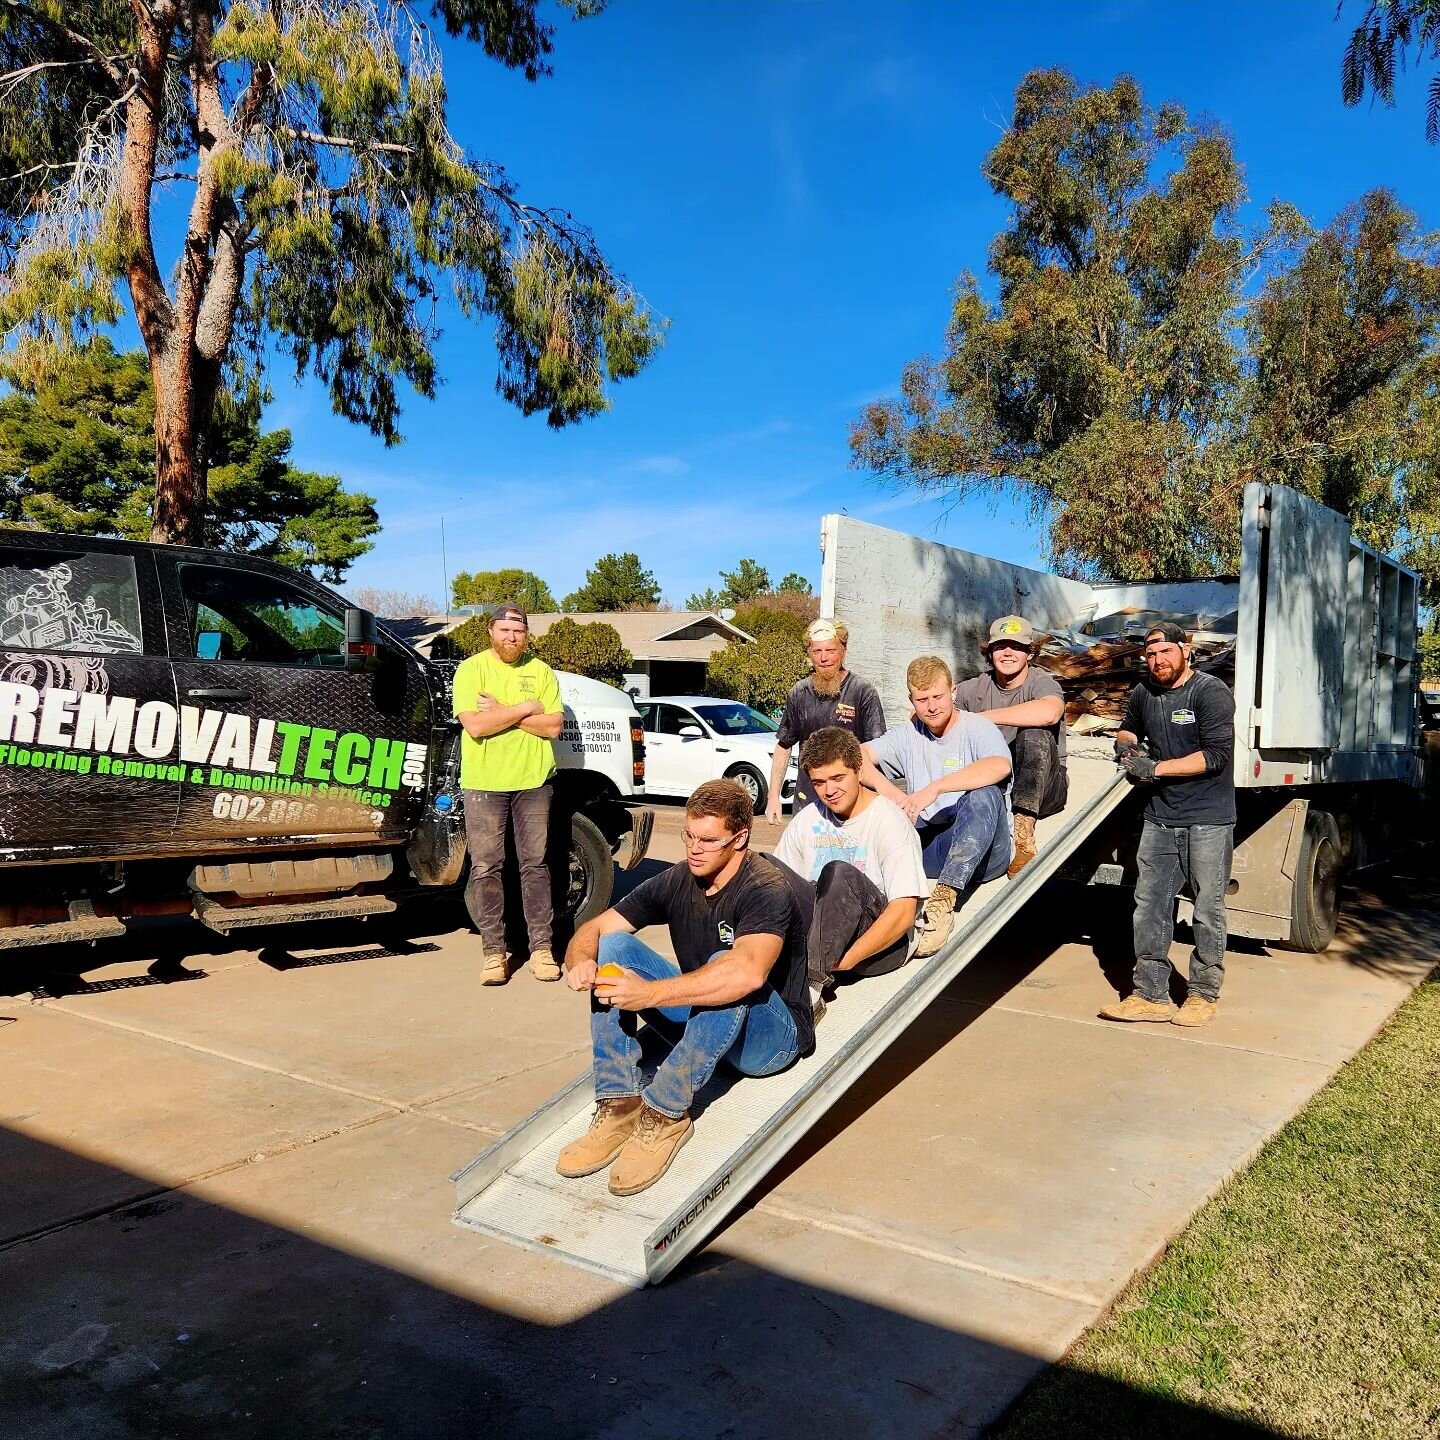 HAPPY FRIDAY FROM OUR CREW TO YOURS!

REMOVALTECH.COM 
602.888.0353